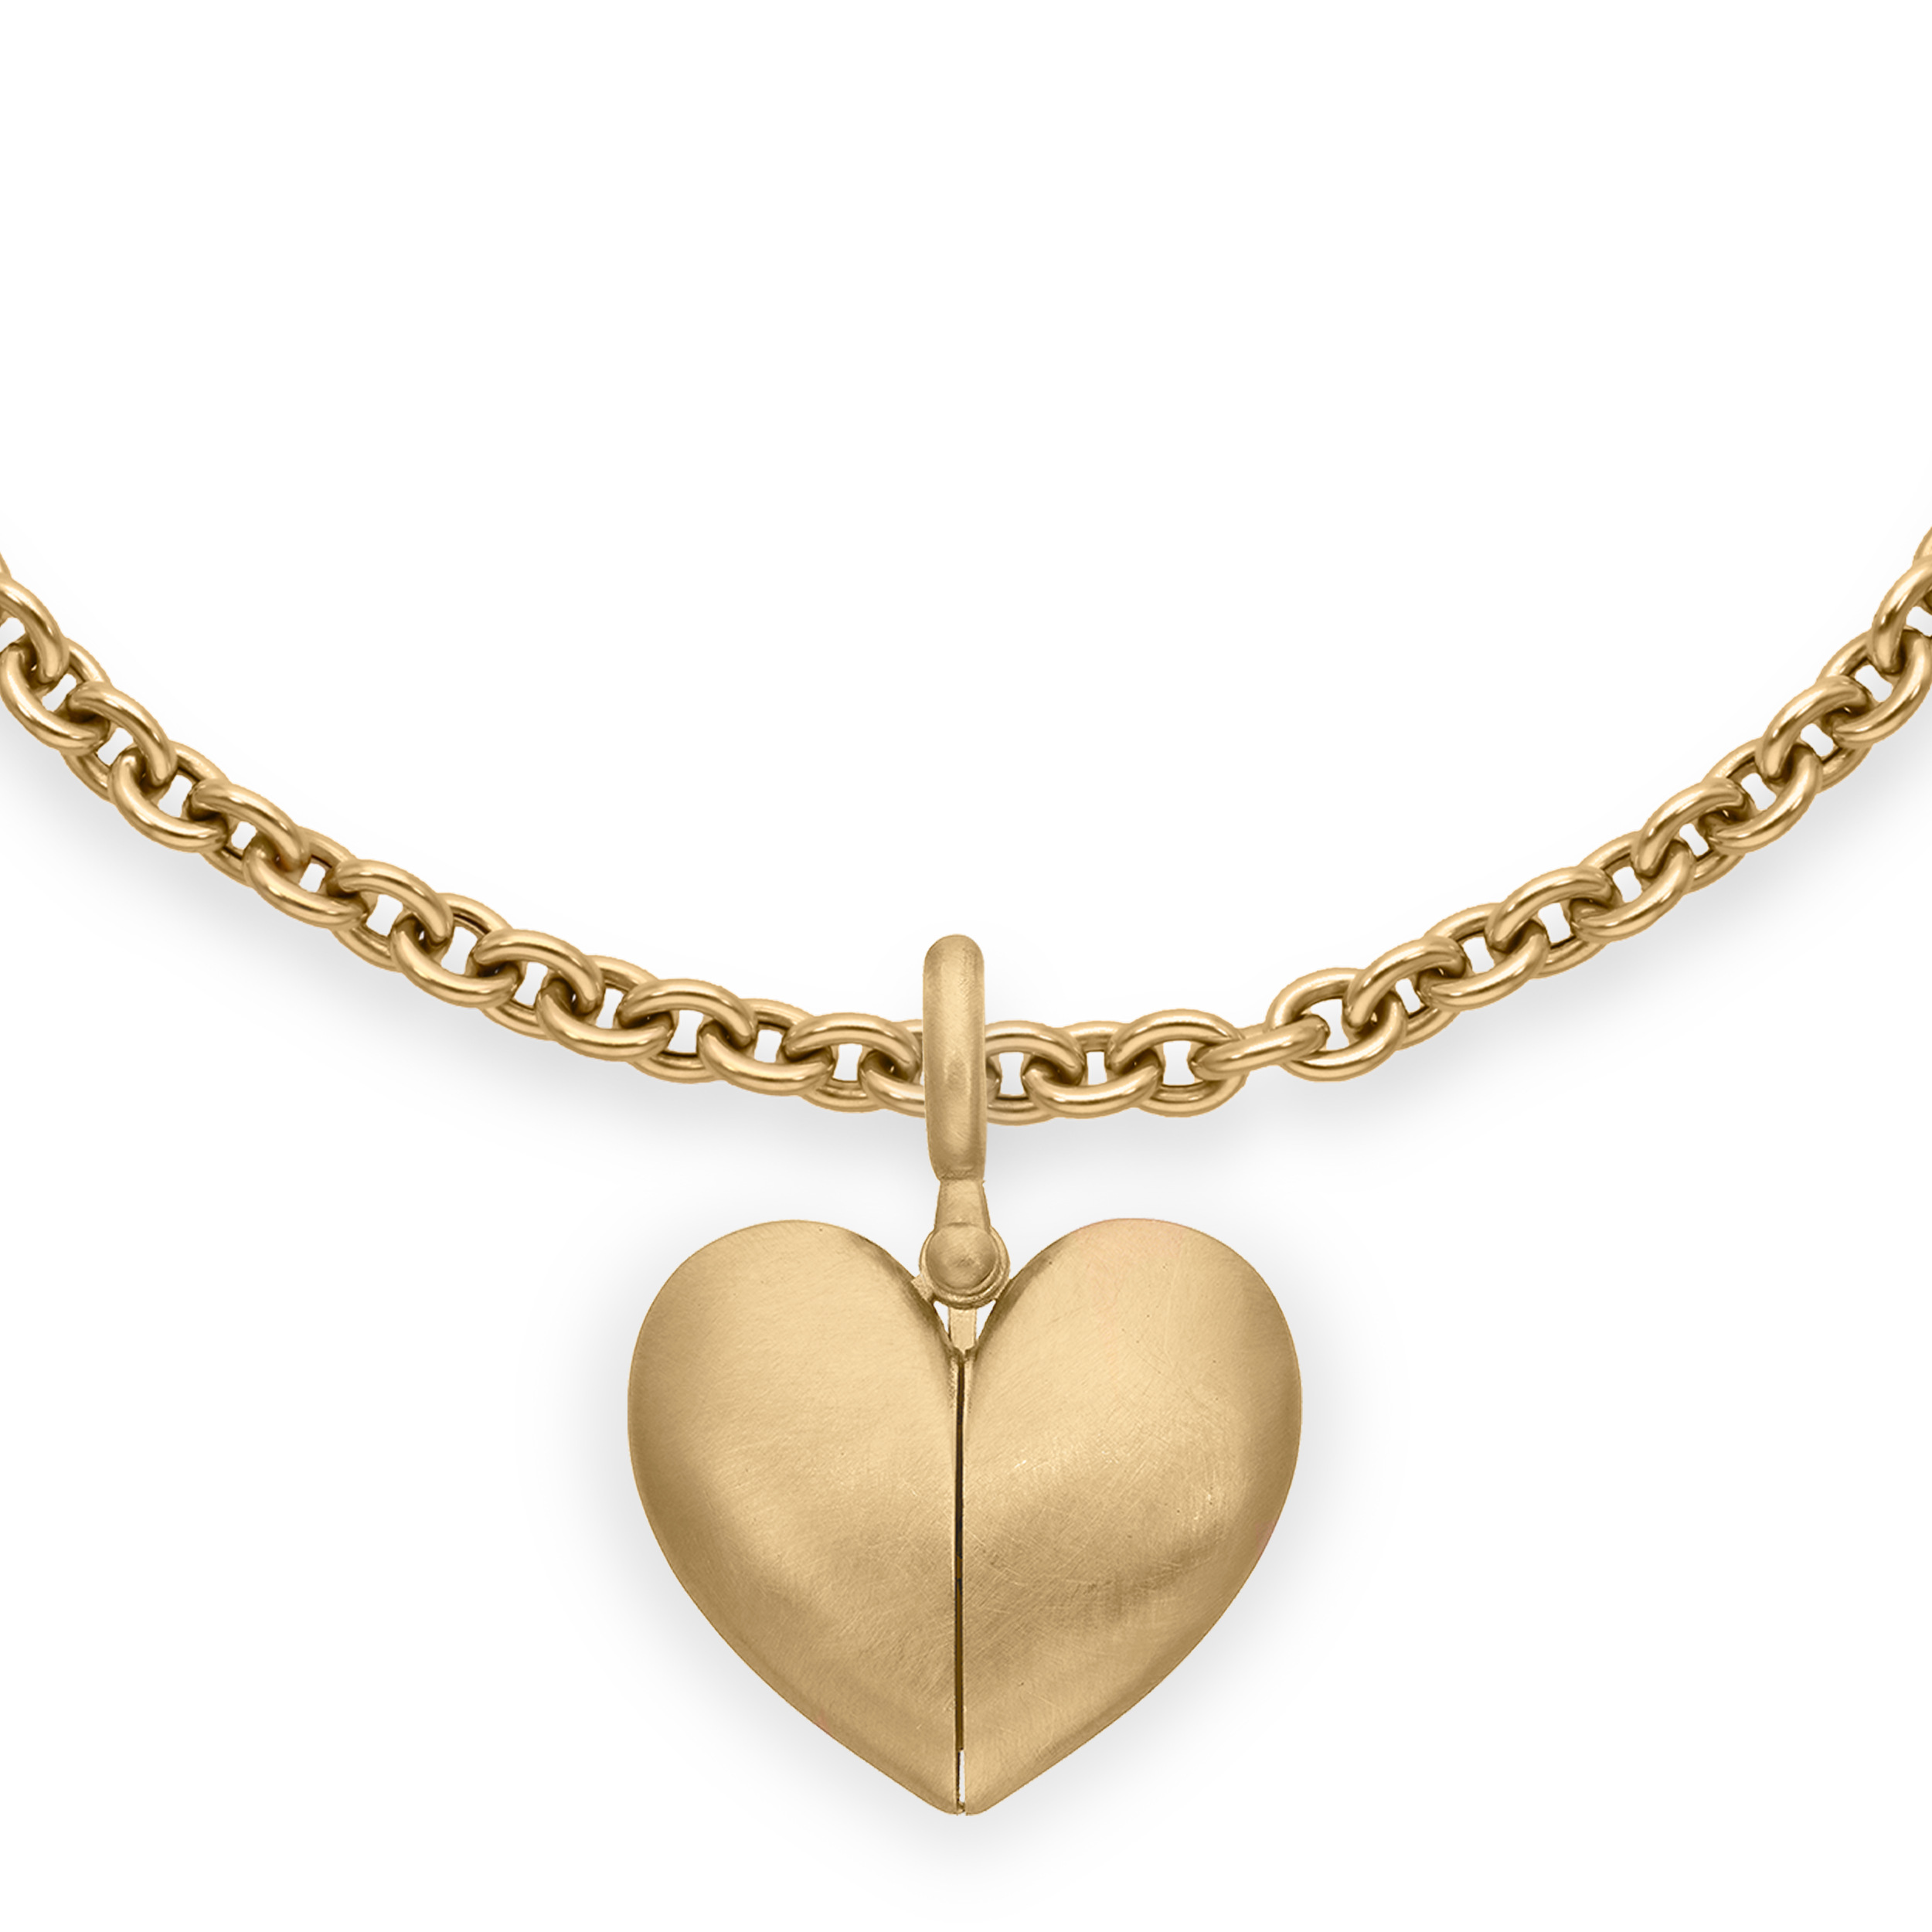 Paulette Brushed Yellow Gold Open Heart Pendant on Short Chain Necklace 